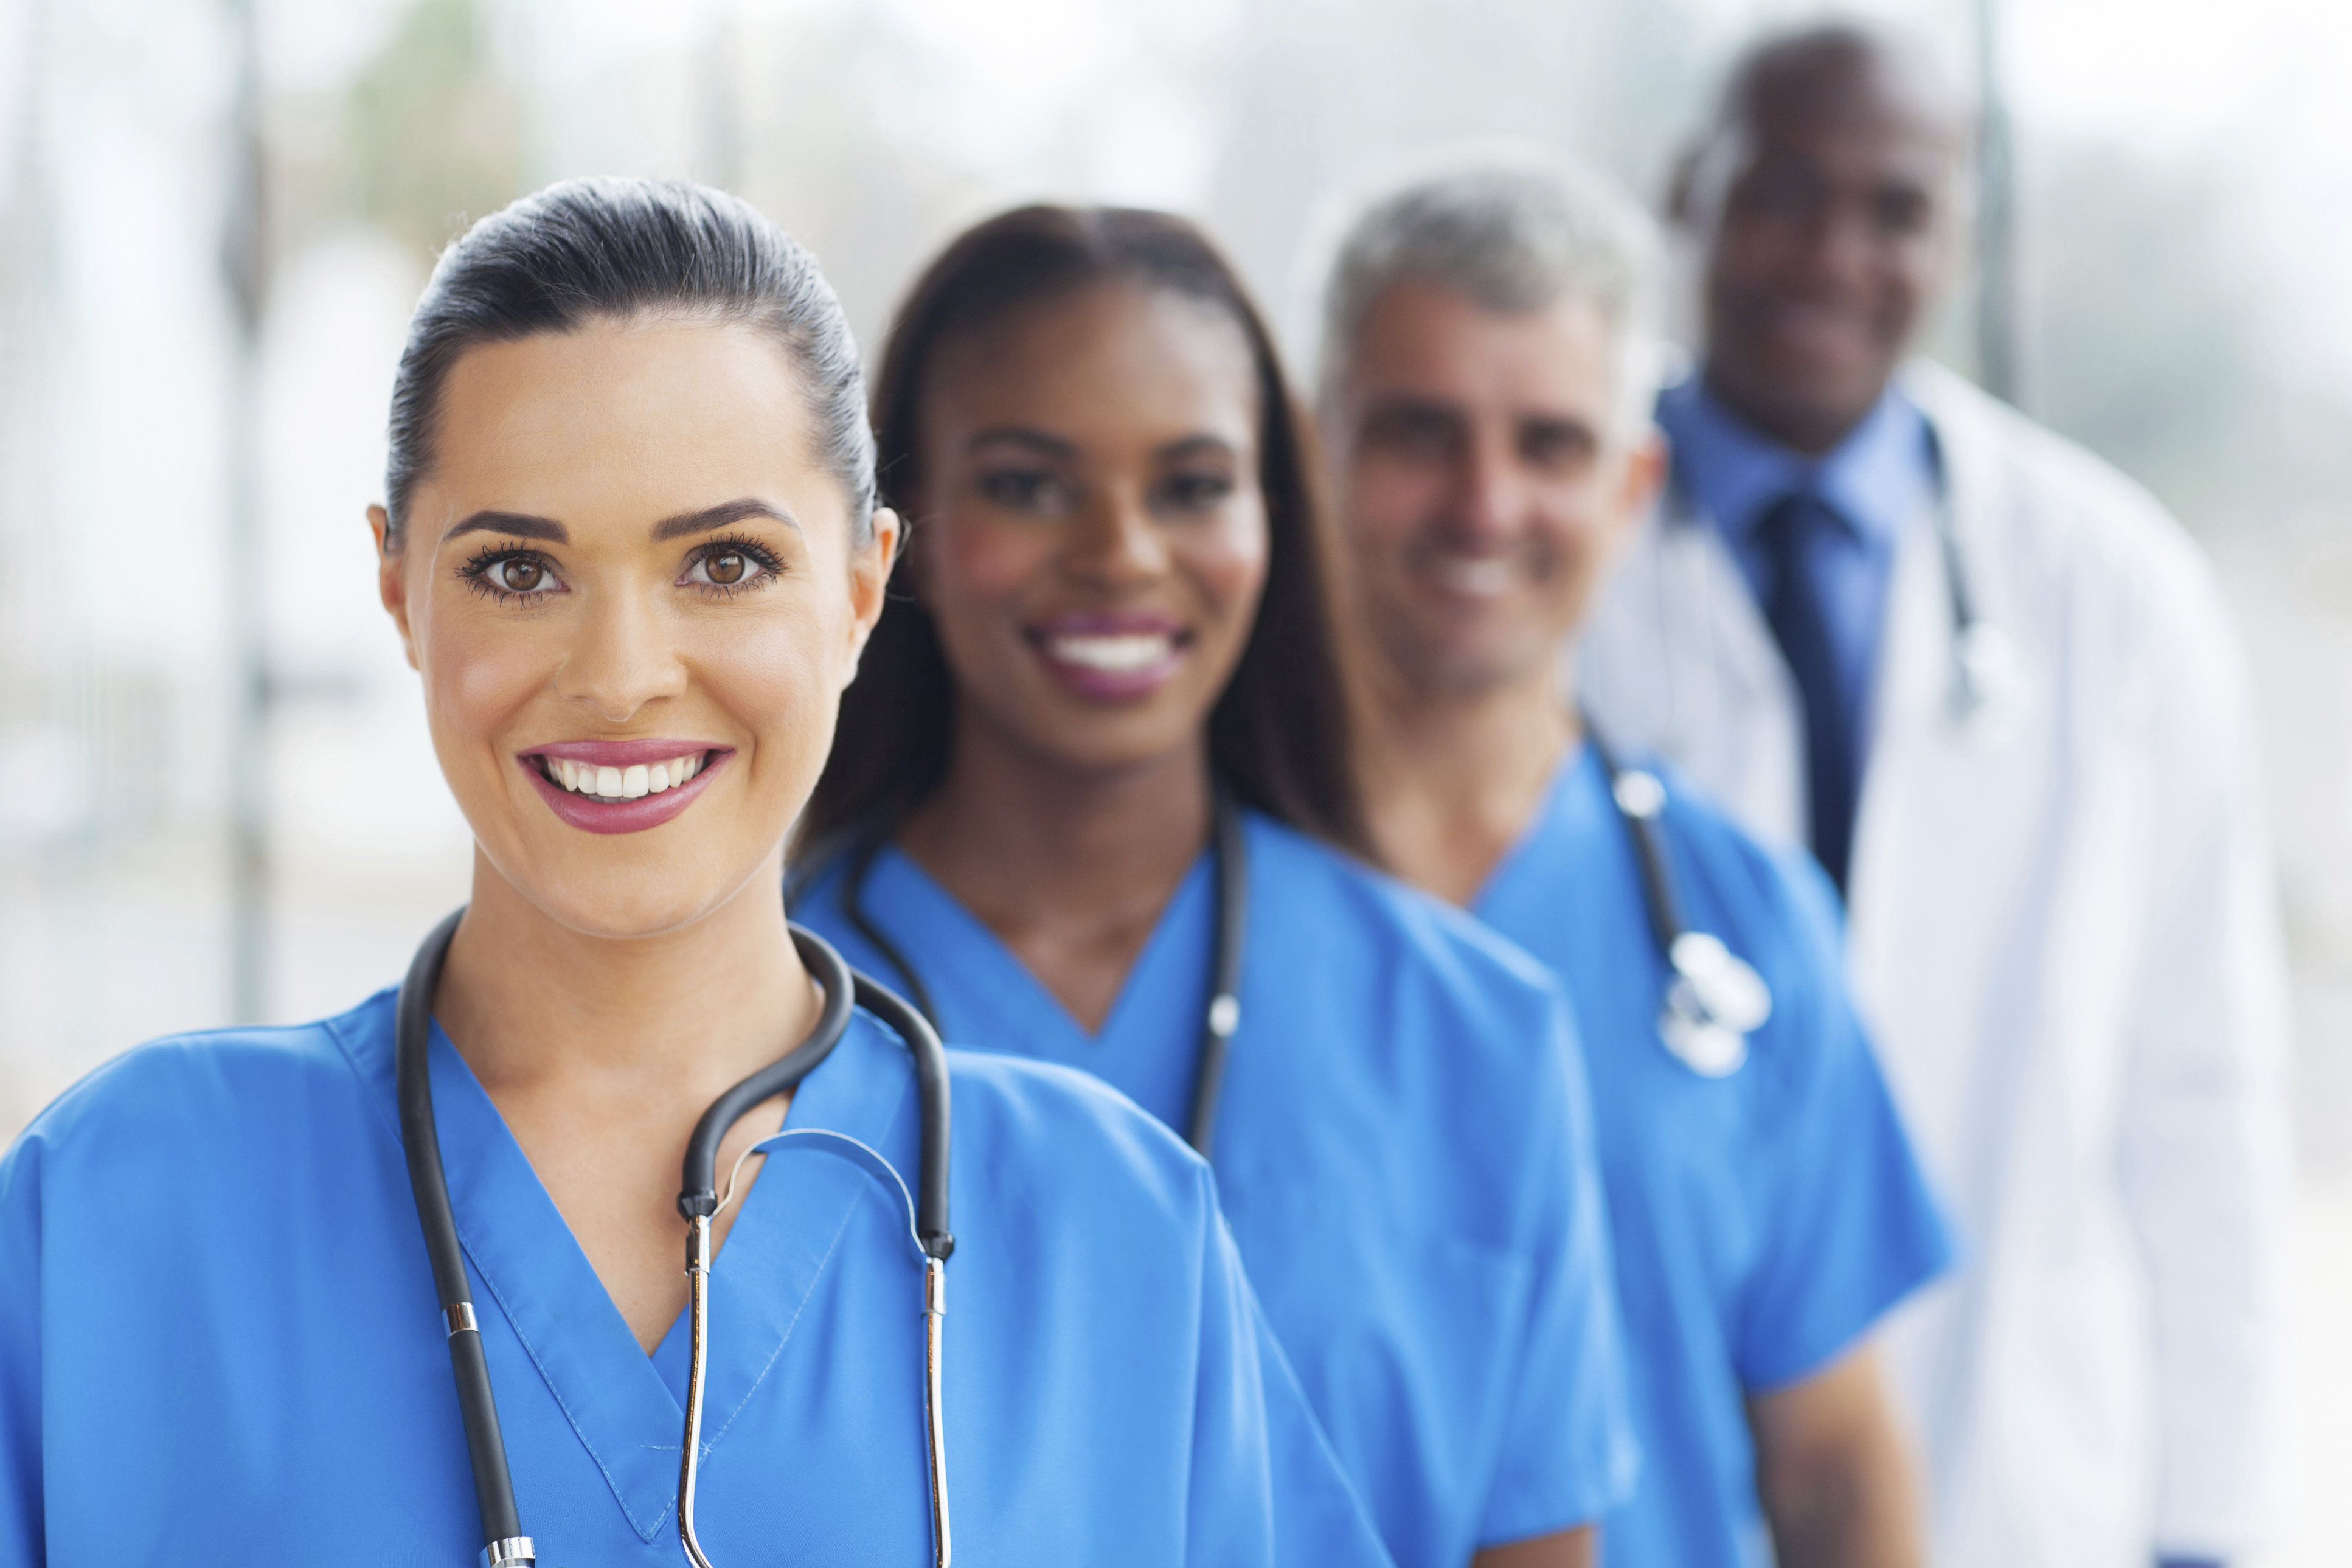 group of multi-ethnic medical professionals